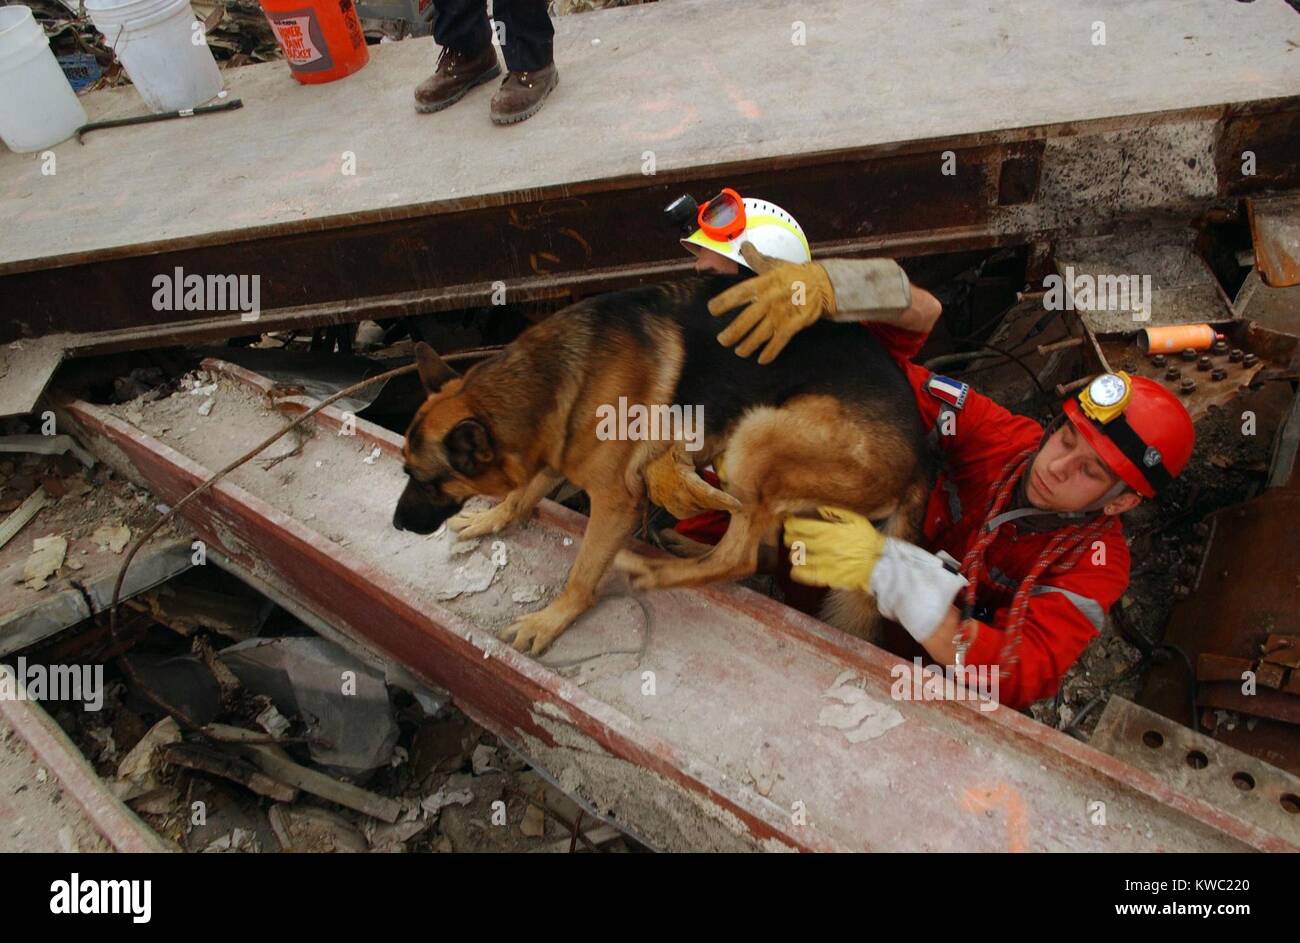 A canine rescue worker and his handler emerge from the pile of rubble at Ground Zero. Sept 21, 2001. World Trade Center, New York City, after September 11, 2001 terrorist attacks. (BSLOC 2015 2 103) Stock Photo